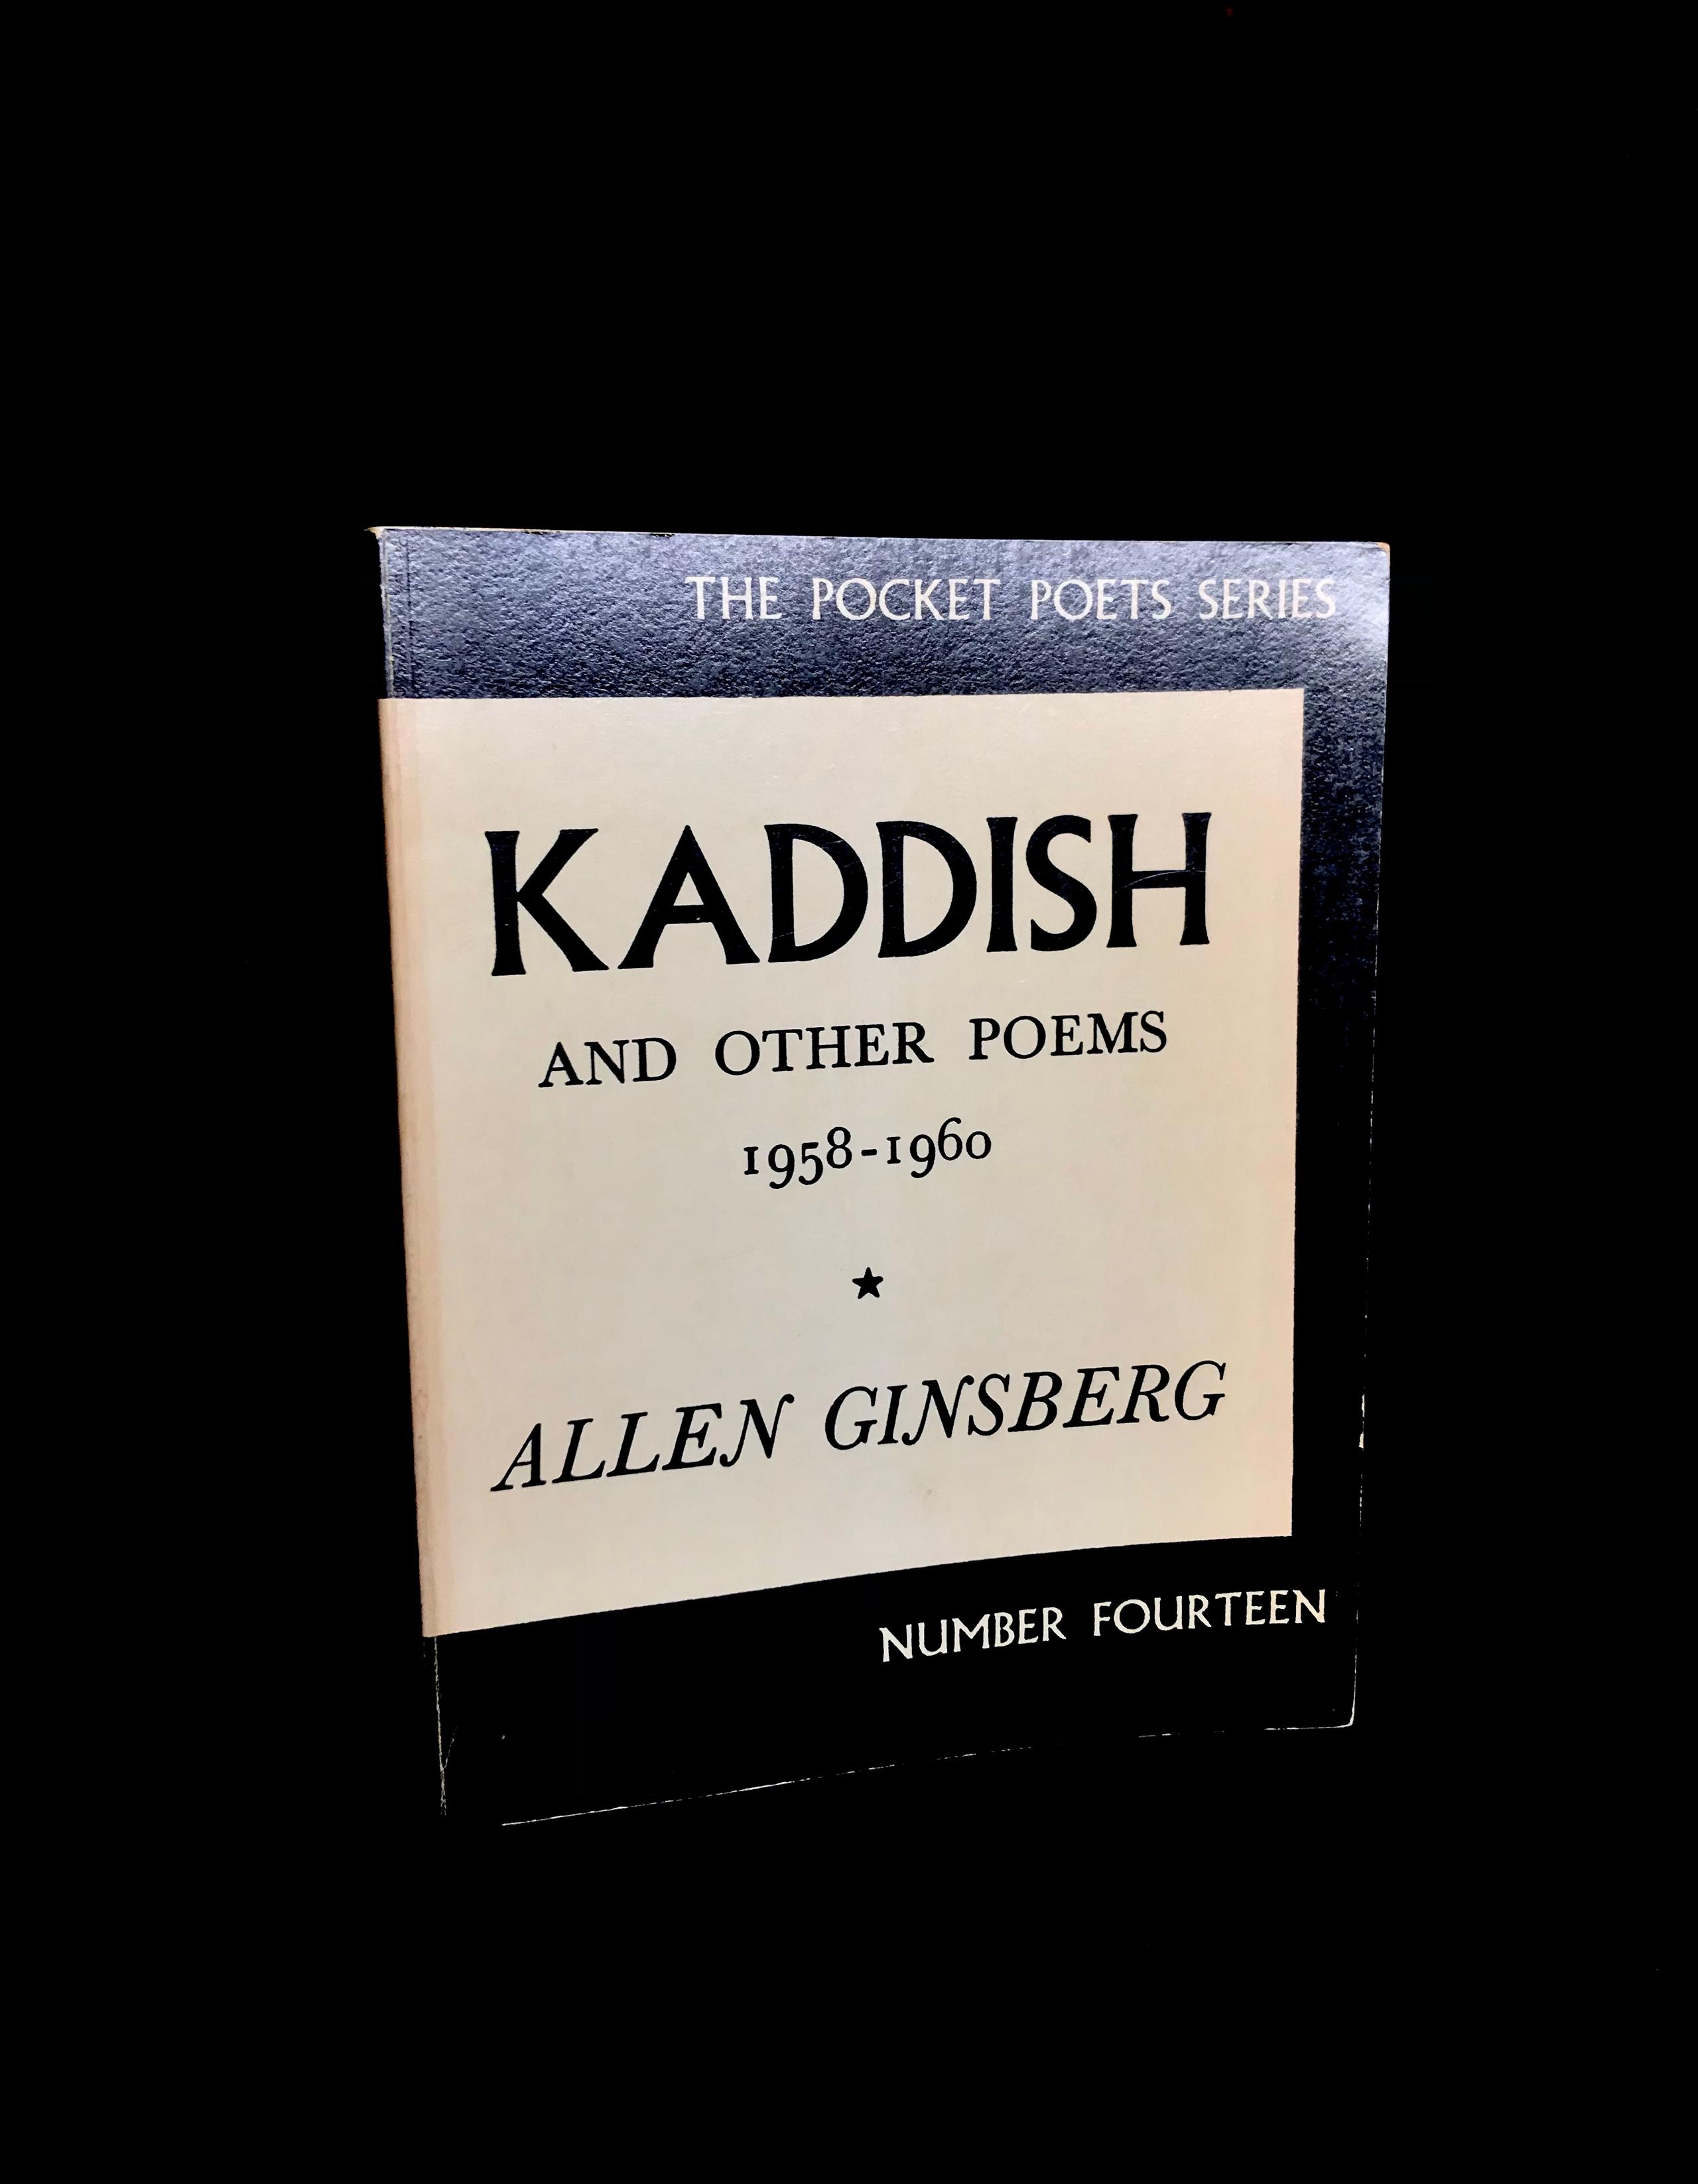 Kaddish And Other Poems 1958-1960 by Allen Ginsburg